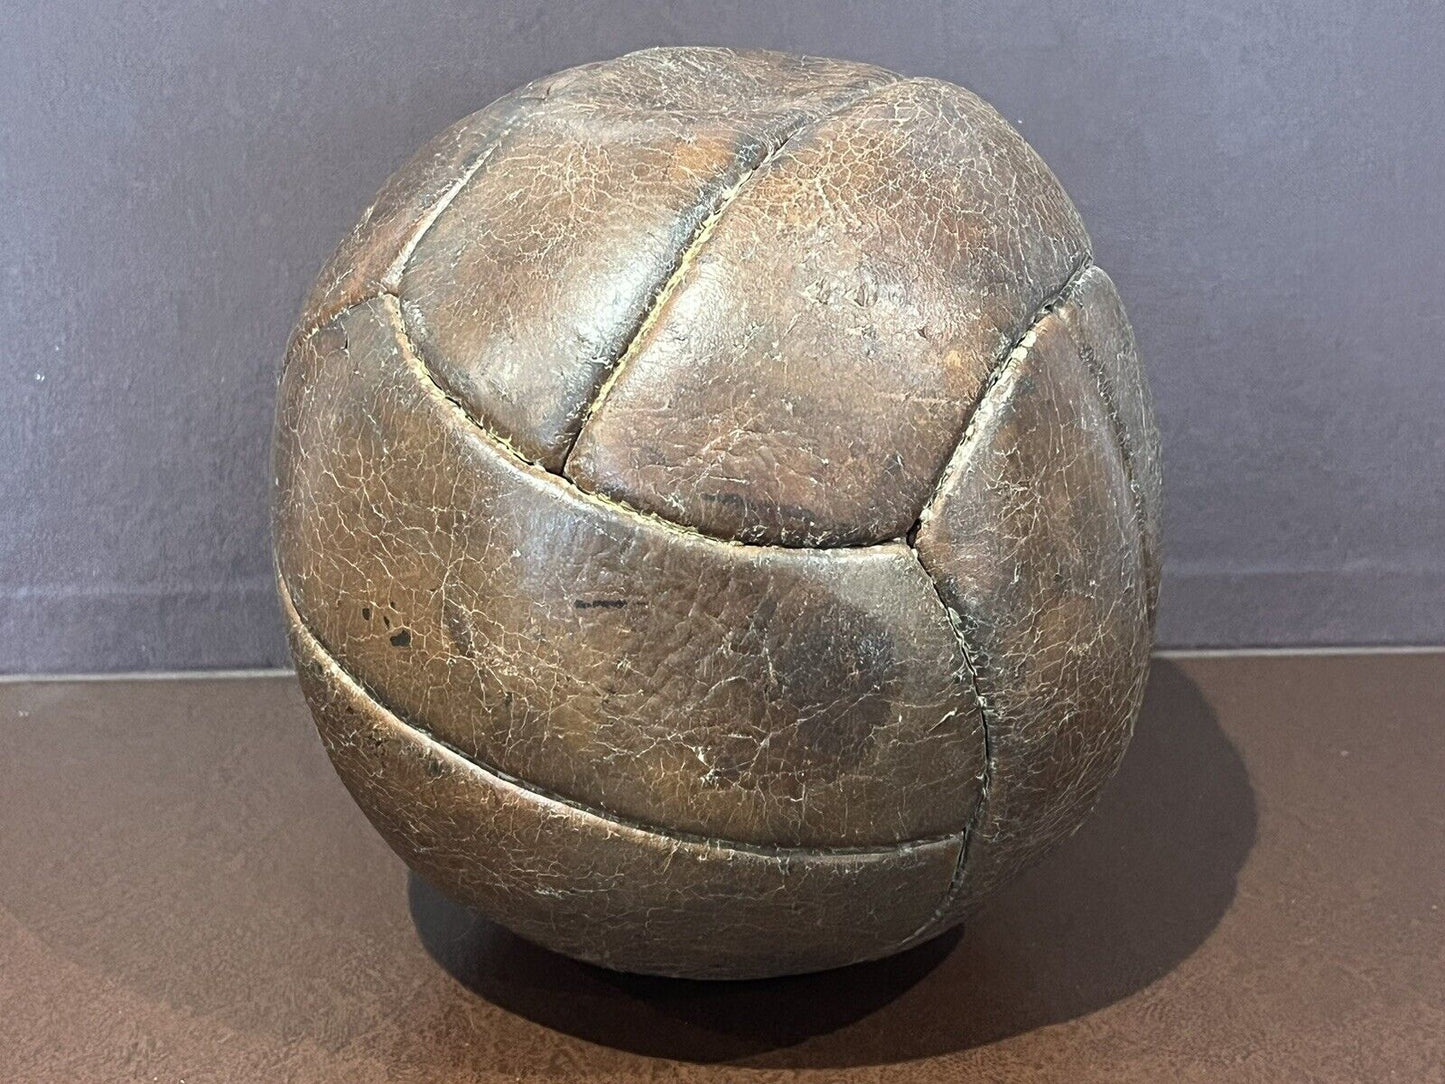 Old Leather Football